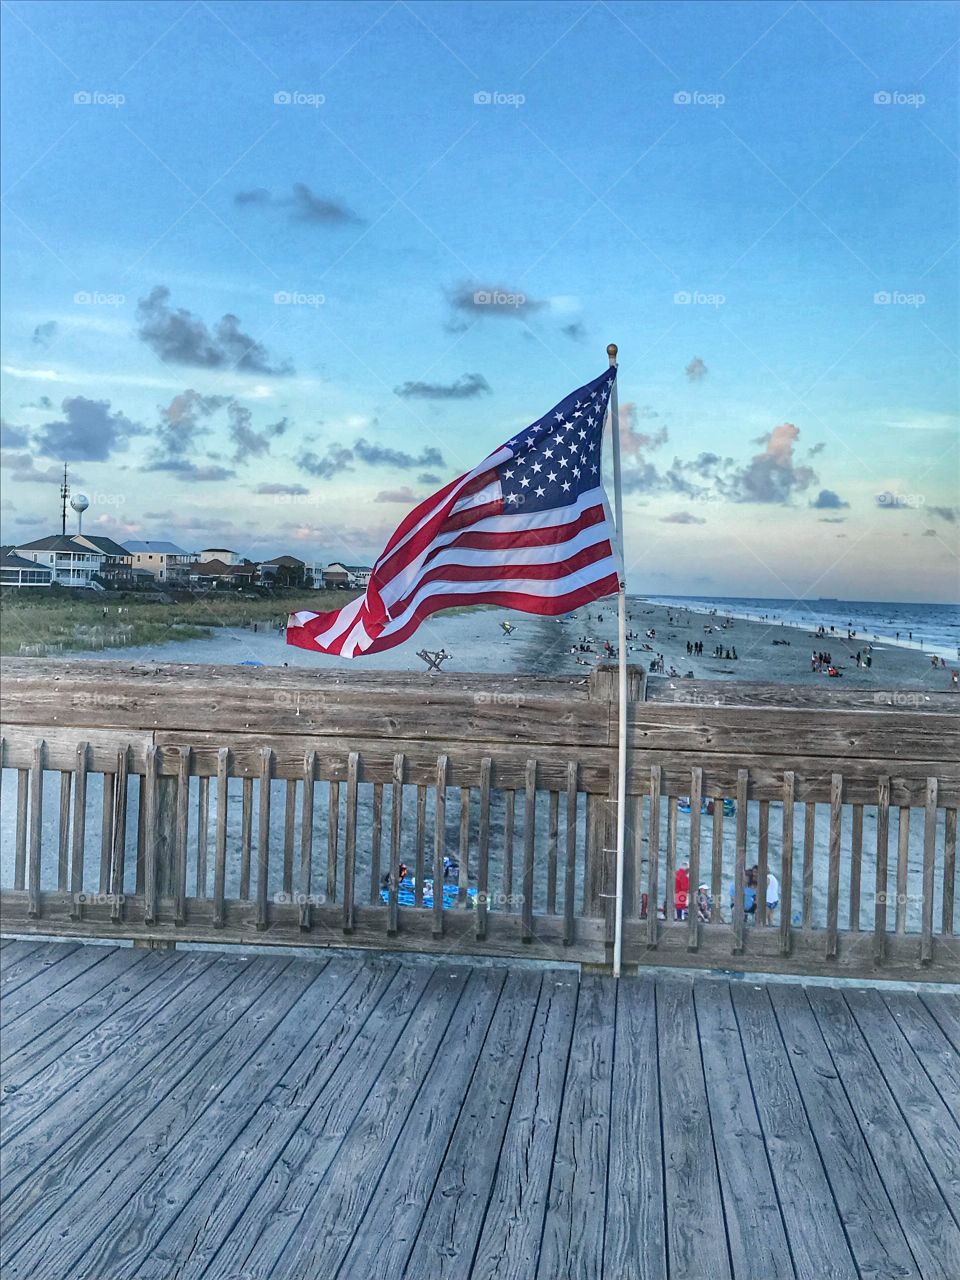 Admiring Old Glory, our flag, flying in the beach breeze. 